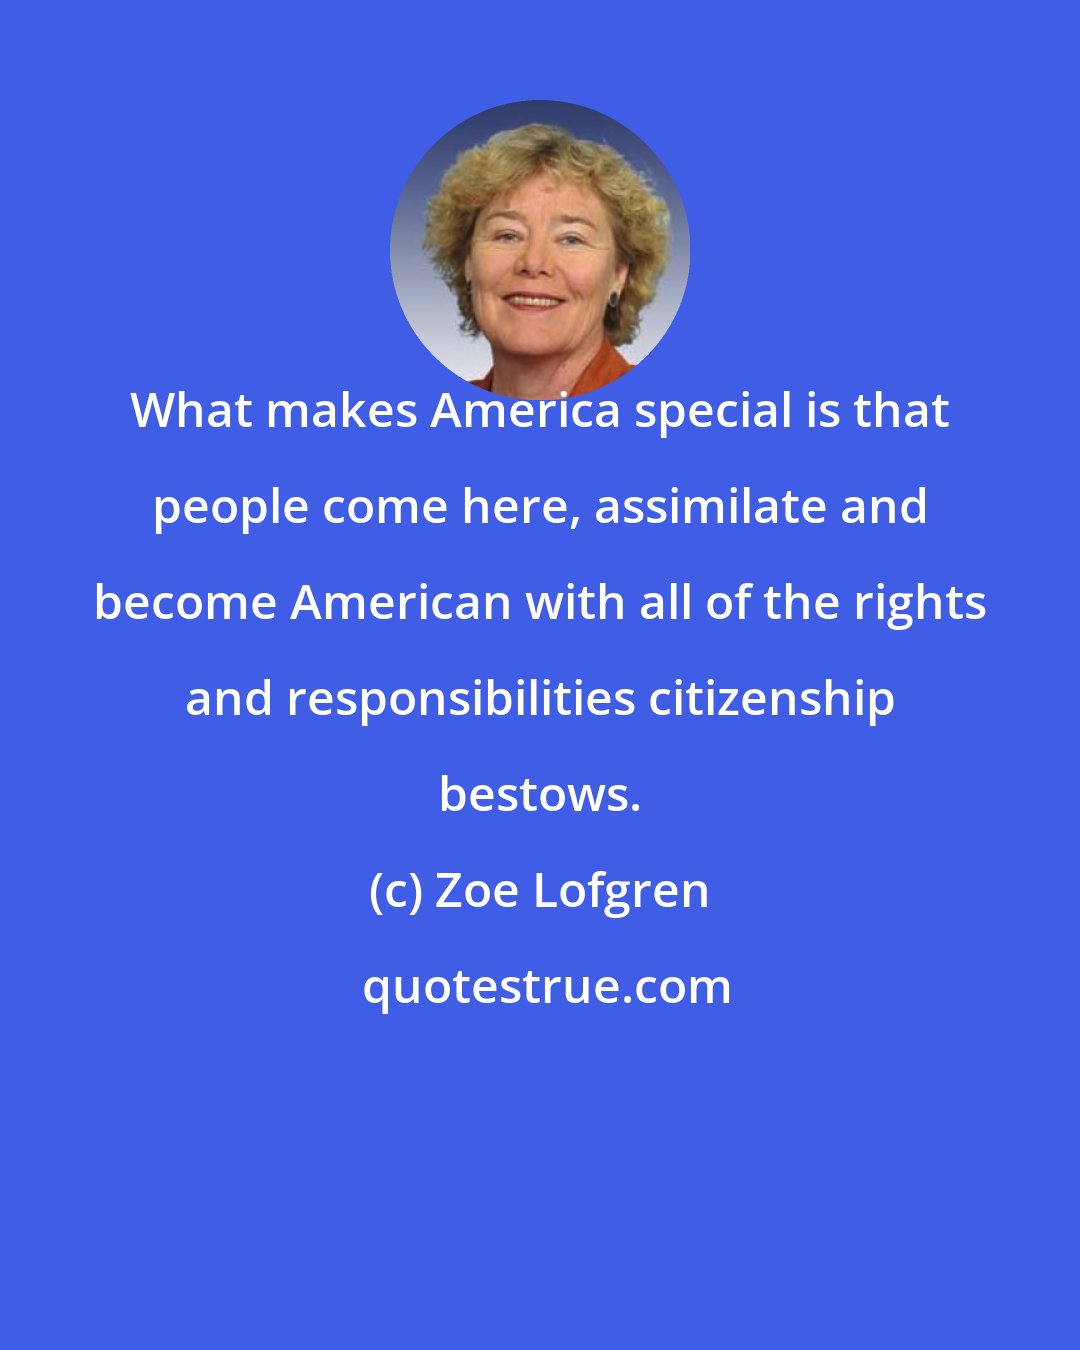 Zoe Lofgren: What makes America special is that people come here, assimilate and become American with all of the rights and responsibilities citizenship bestows.